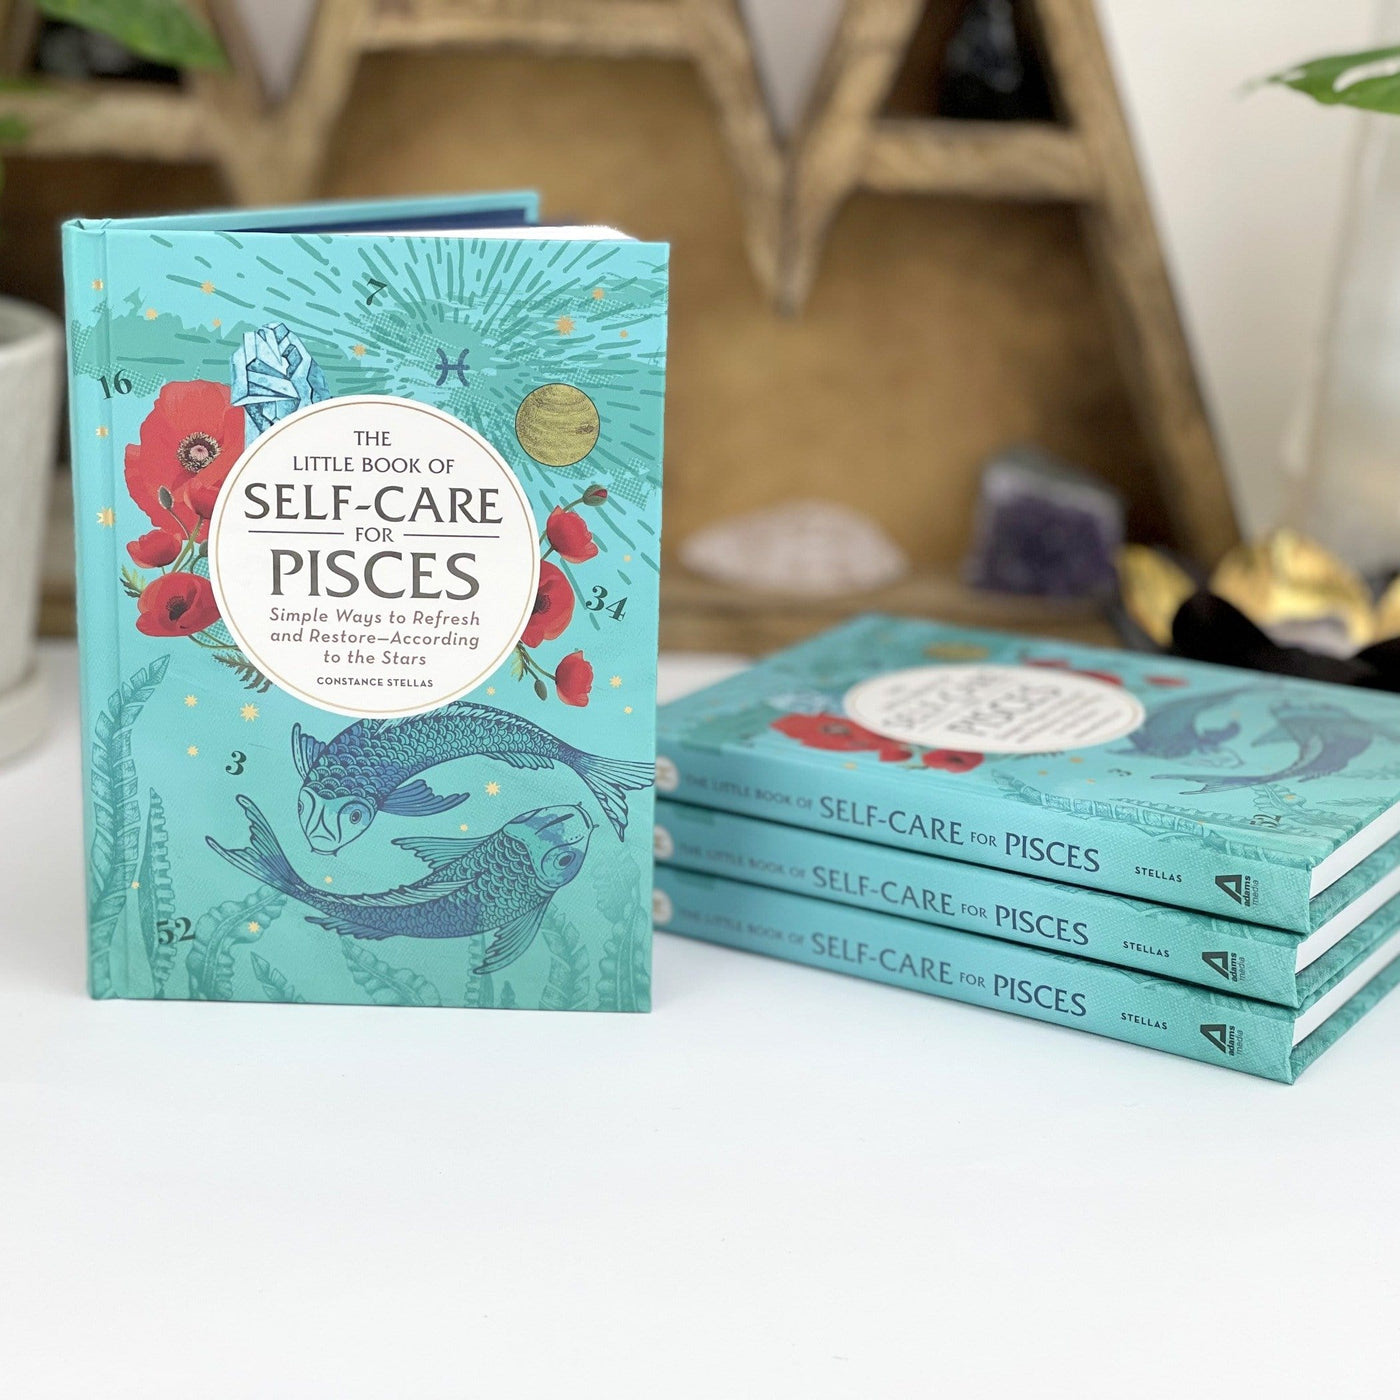 4 books of Self-Care for Pisces 